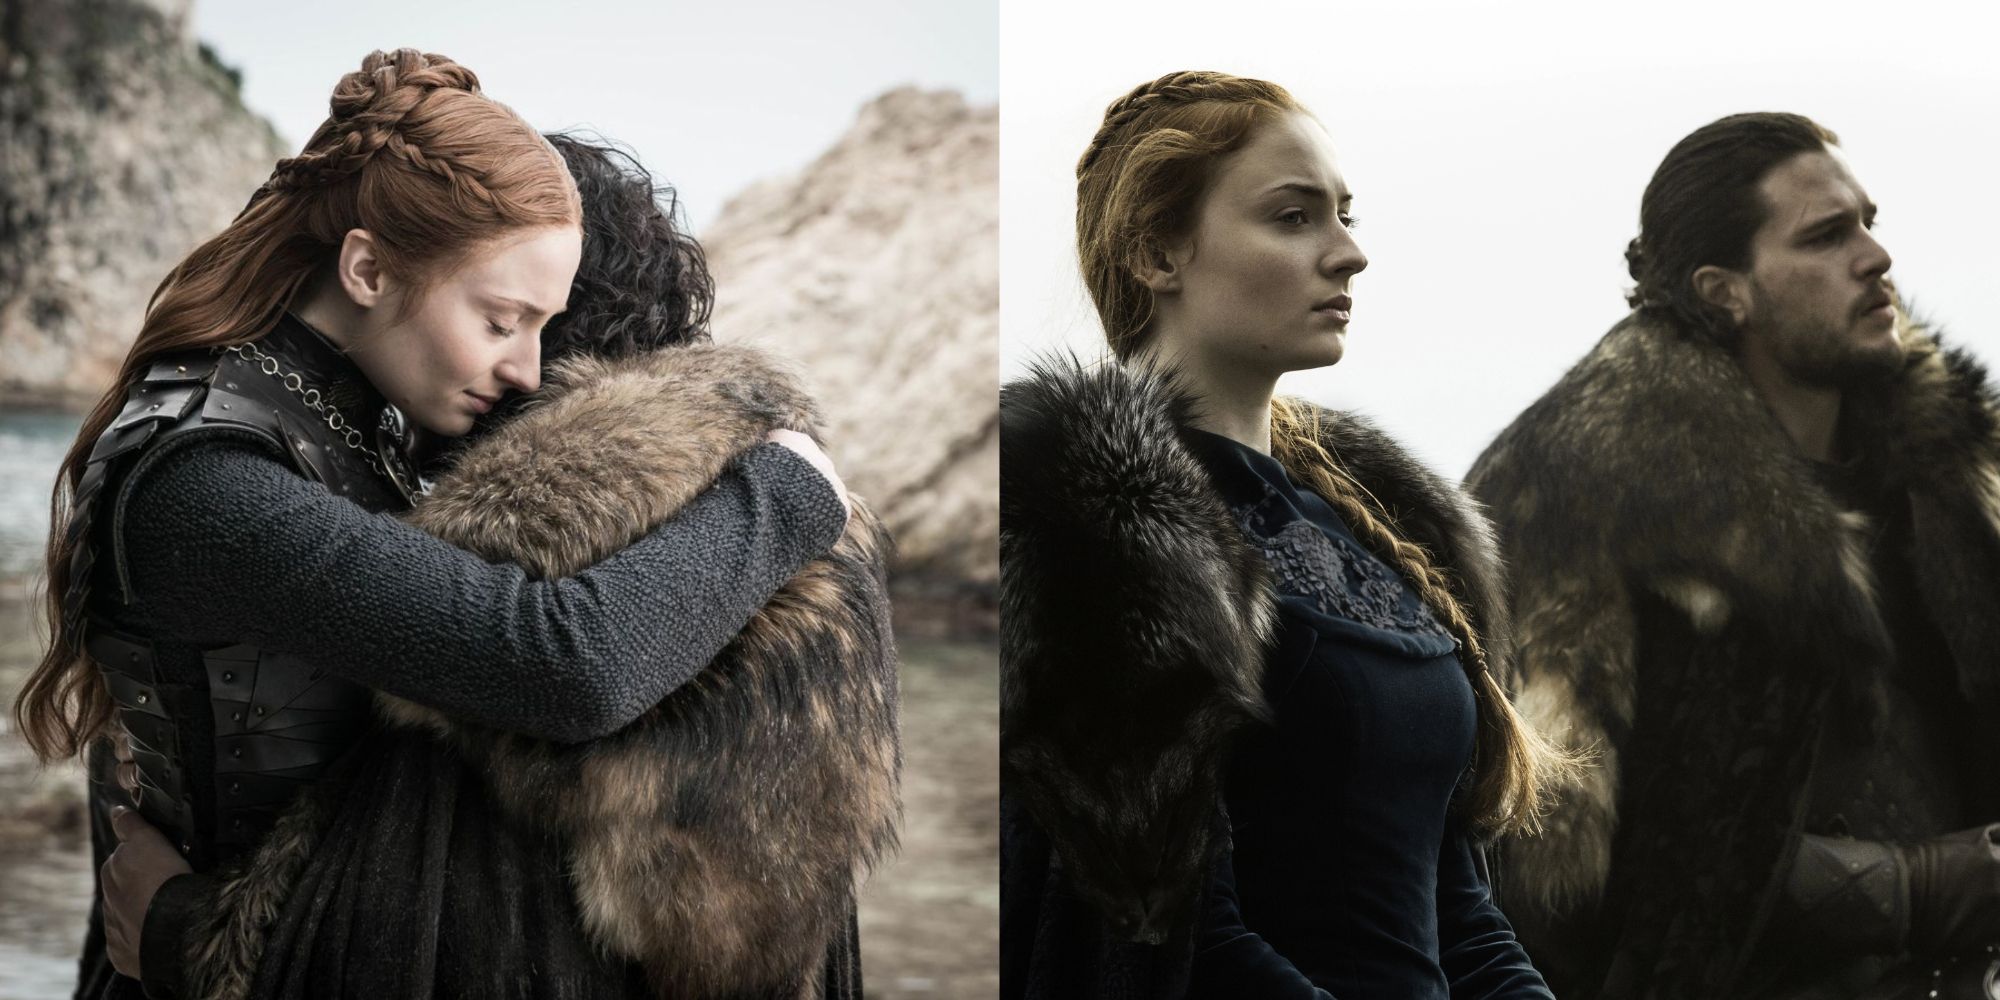 Split feature image showing Sansa Stark and Jon Snow from Game of Thrones.